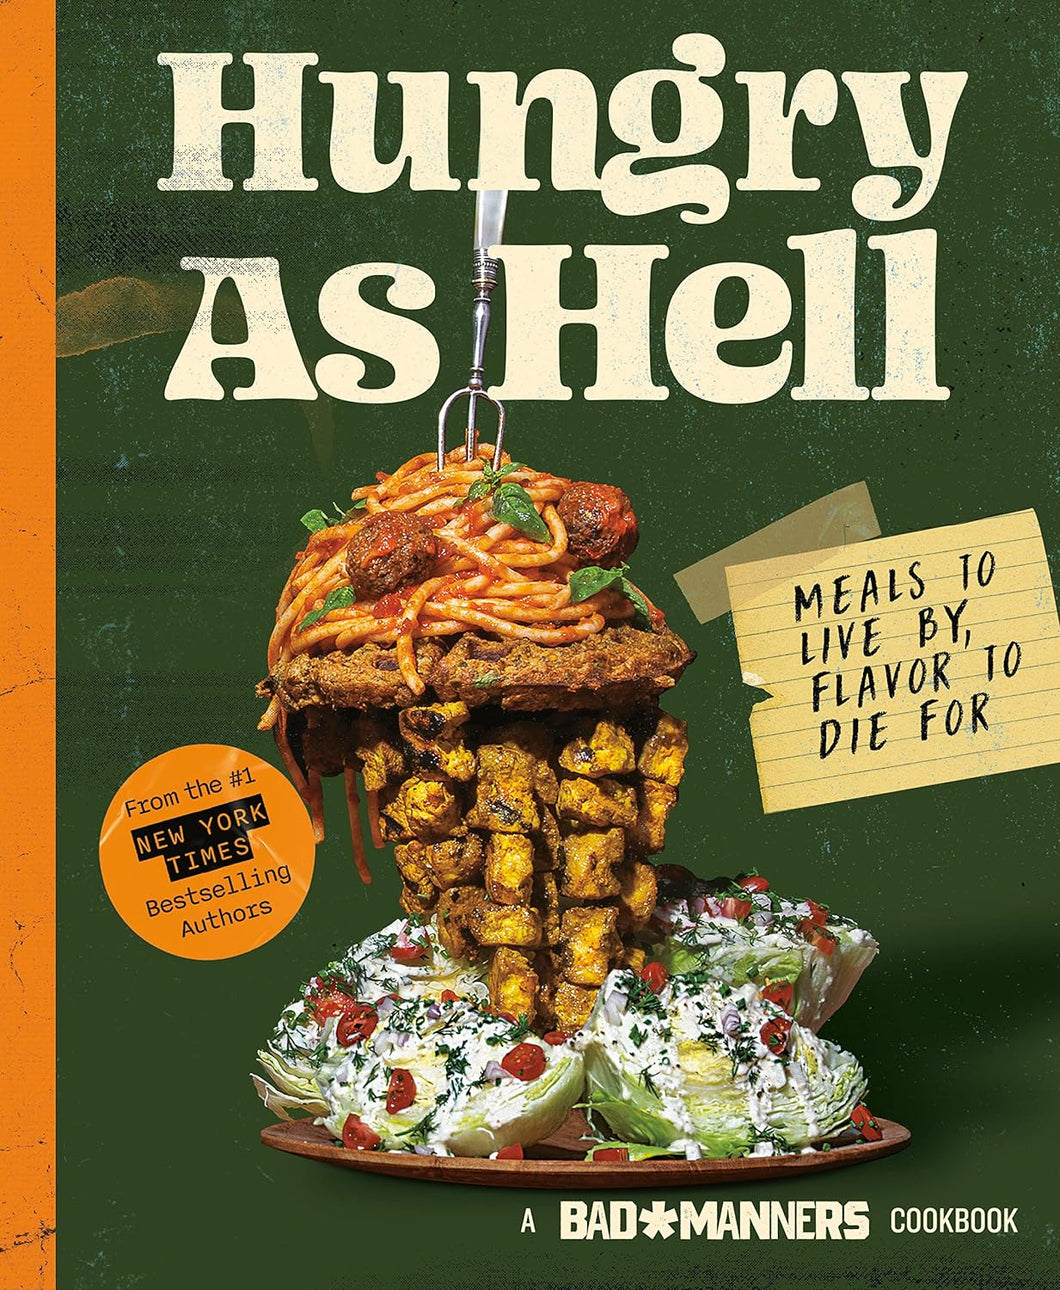 Bad Manners: Hungry as Hell: Meals to Live by, Flavor to Die For: A Vegan Cookbook by Bad Manners, Michelle Davis, Matt Holloway